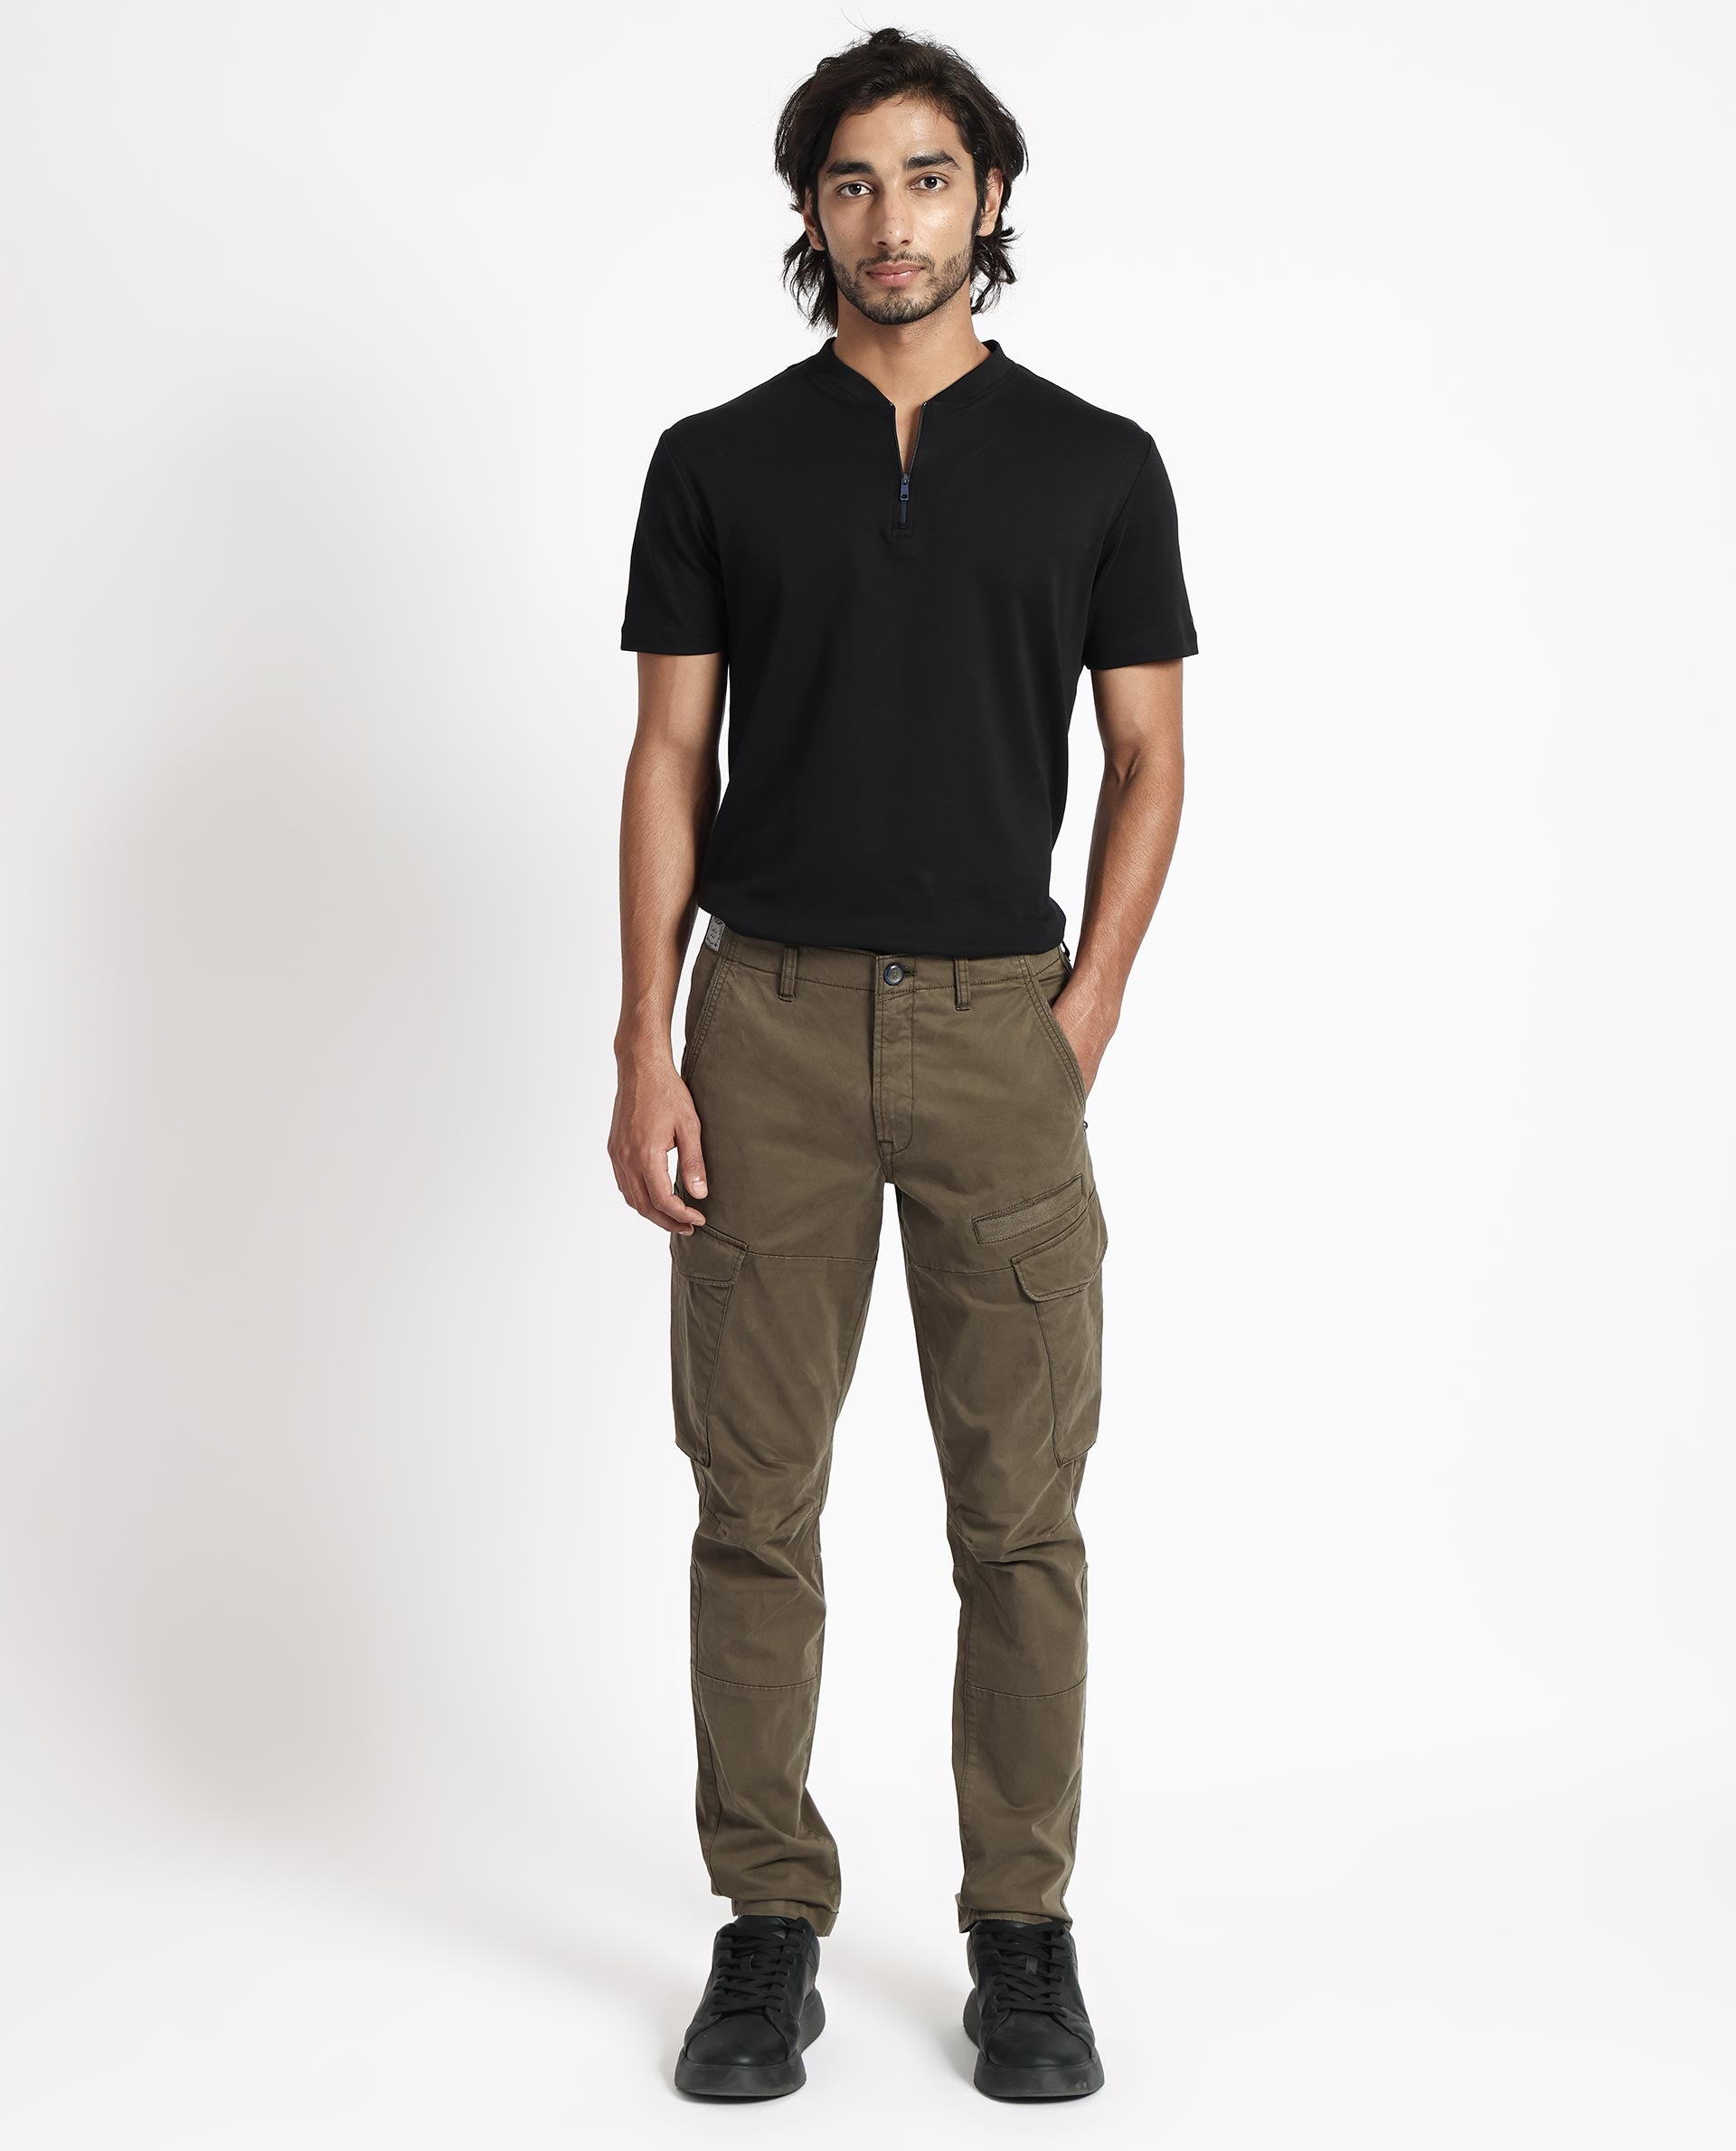 Cargo Pants for Men Solid Casual Multiple Pockets Nepal